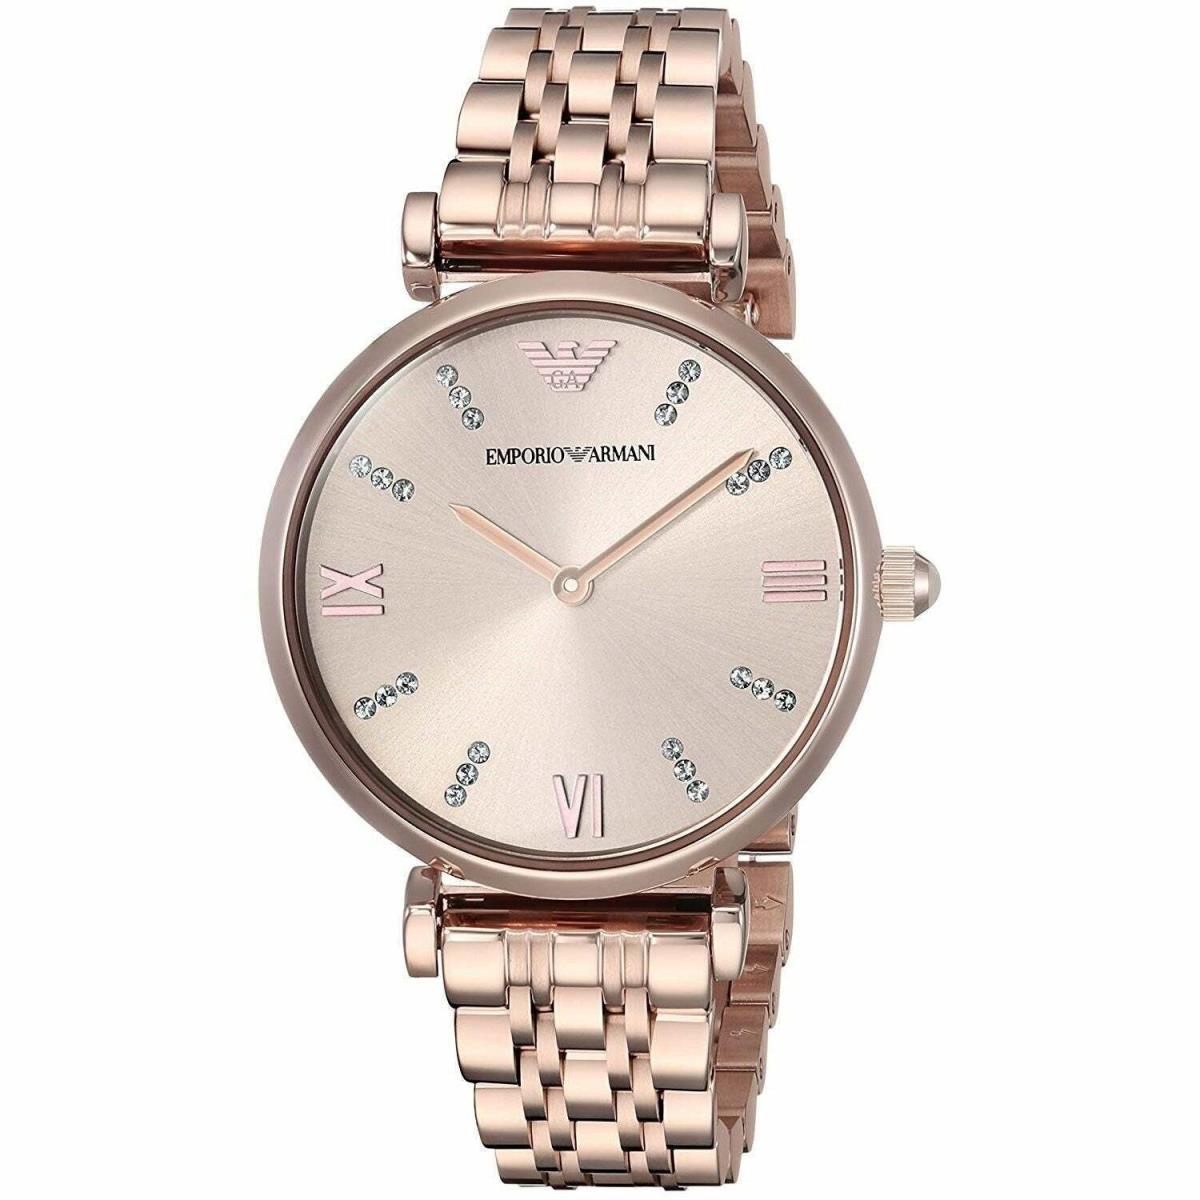 Emporio Armani Women`s Gianni T Bar Stainless Steel Two-hand Dress Watch 11059 - Gold Dial, Gold Band